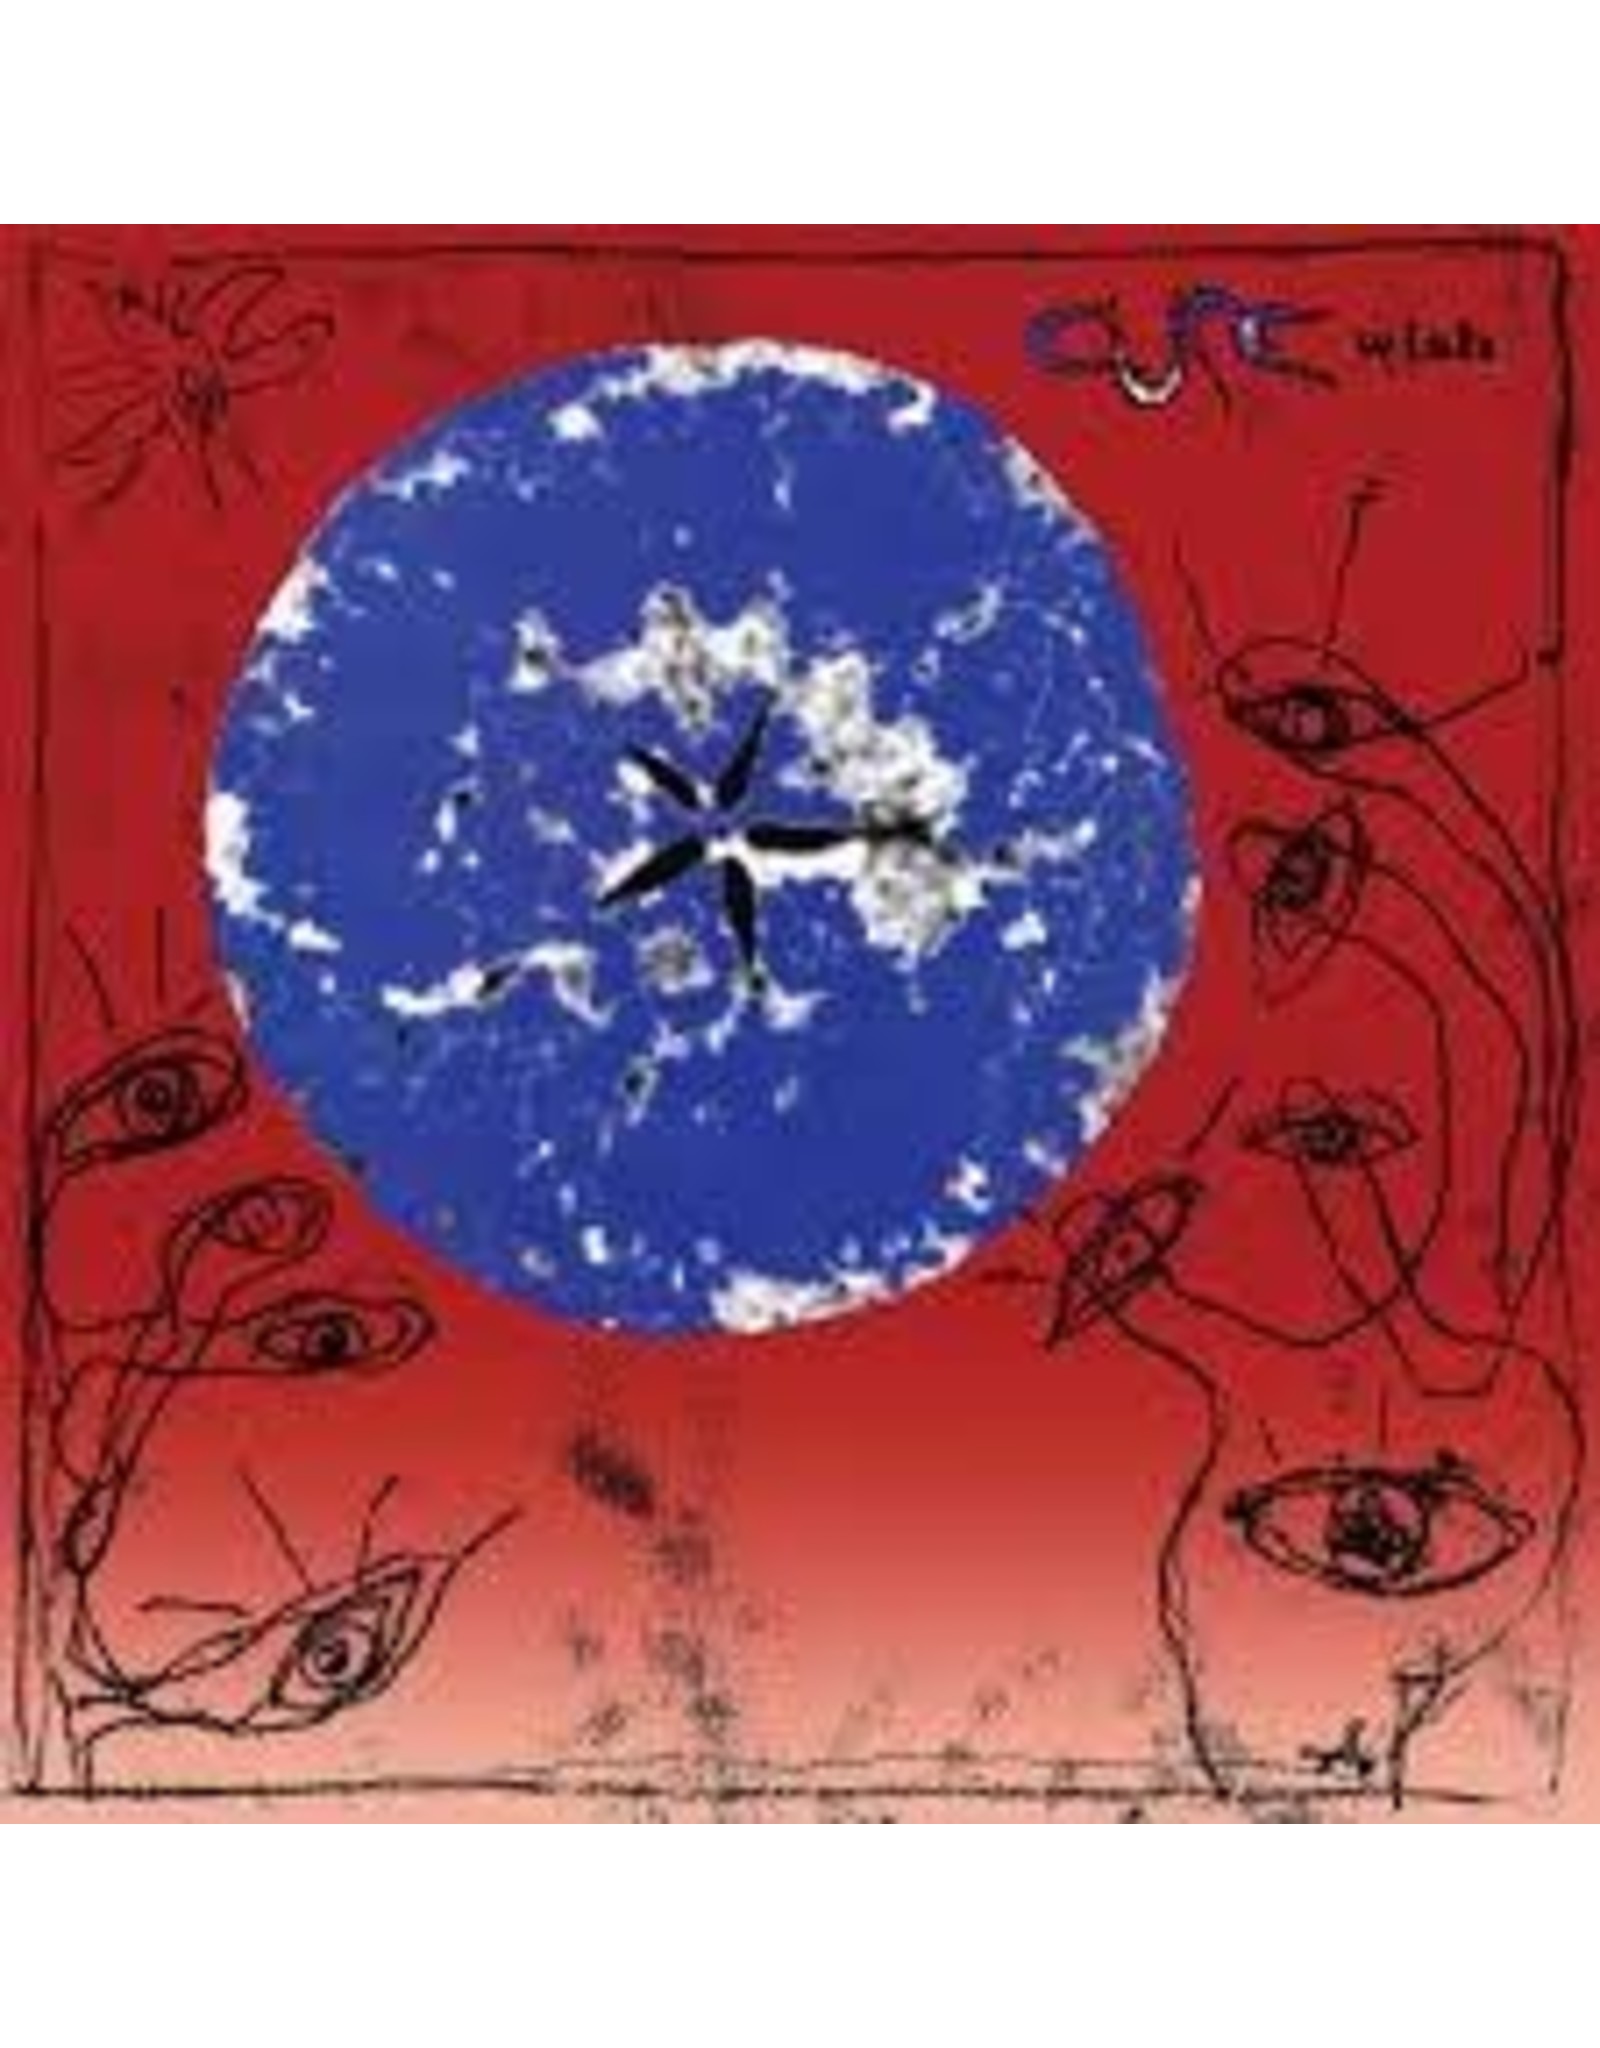 Cure, The - Wish 30TH ANNIVERSARY DLX 3CD